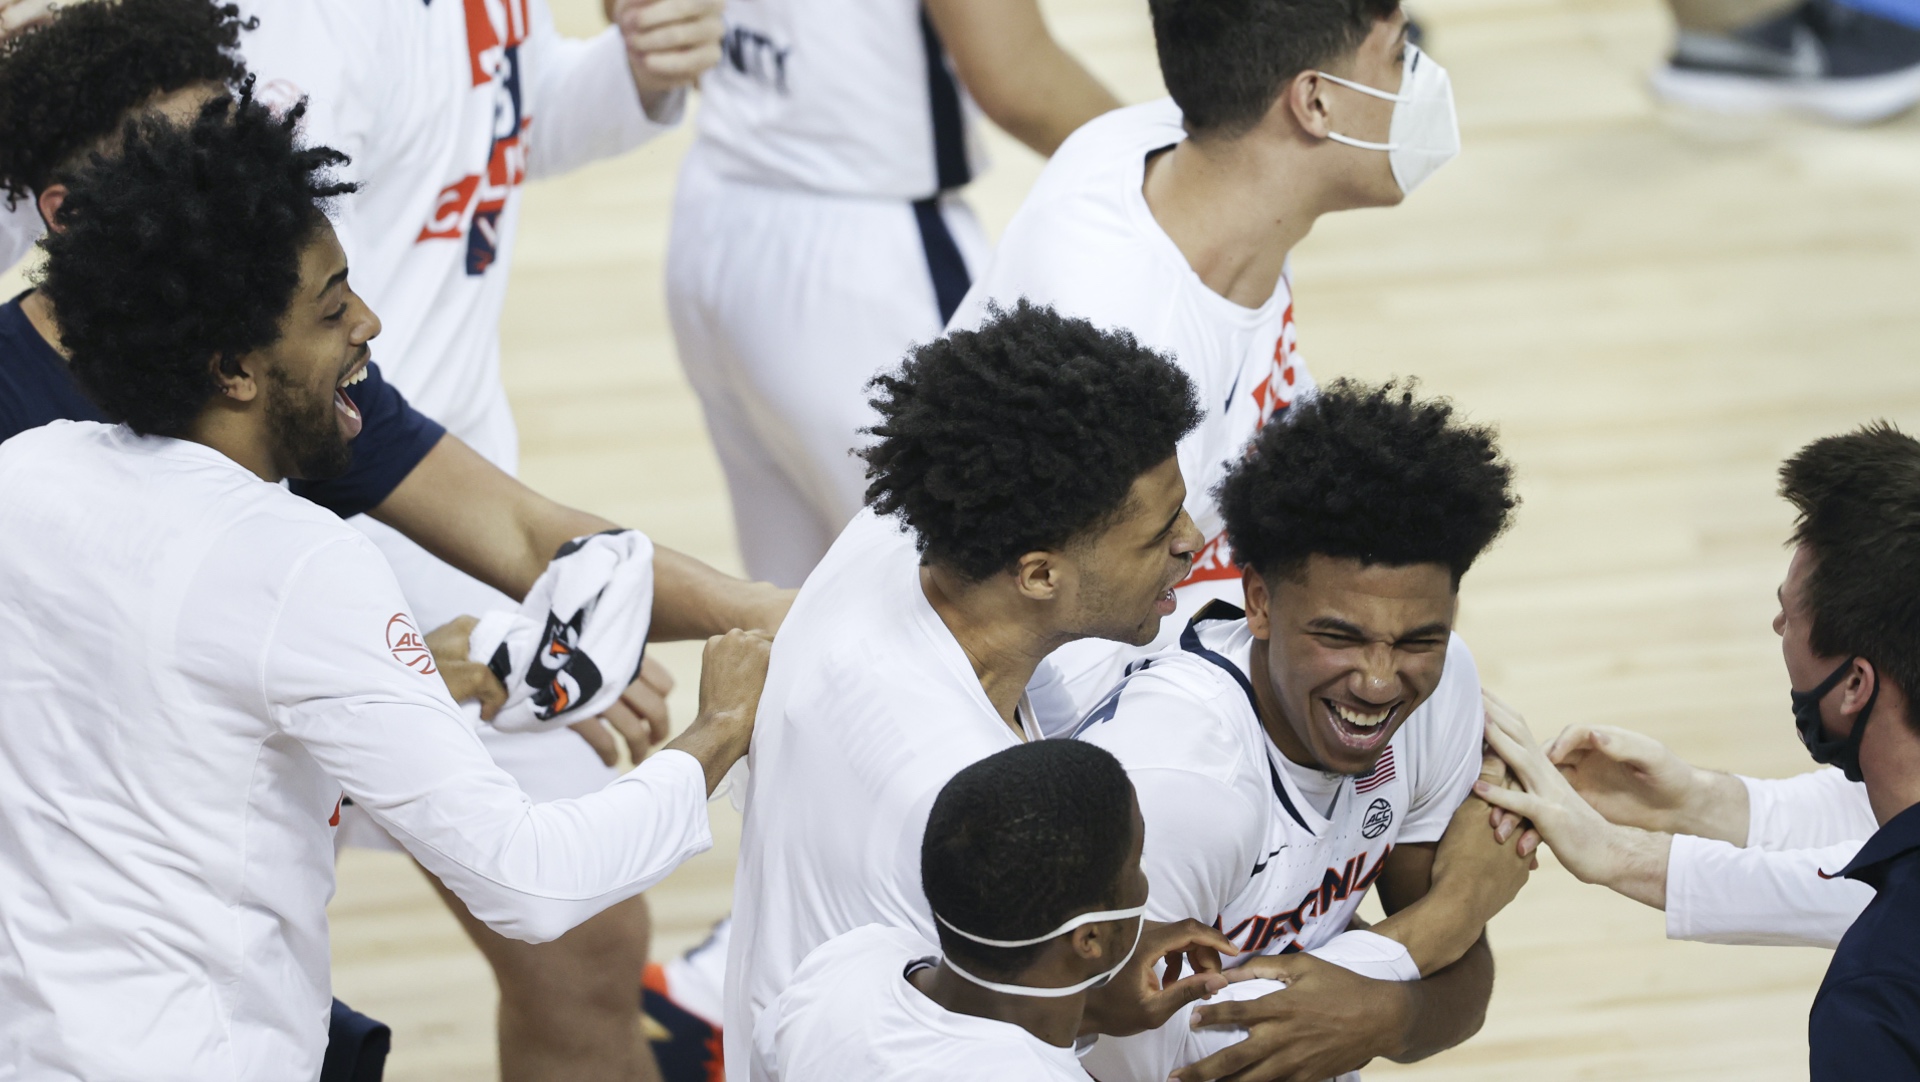 March Madness 2021: How to Watch Virginia Vs. Ohio in the First Round